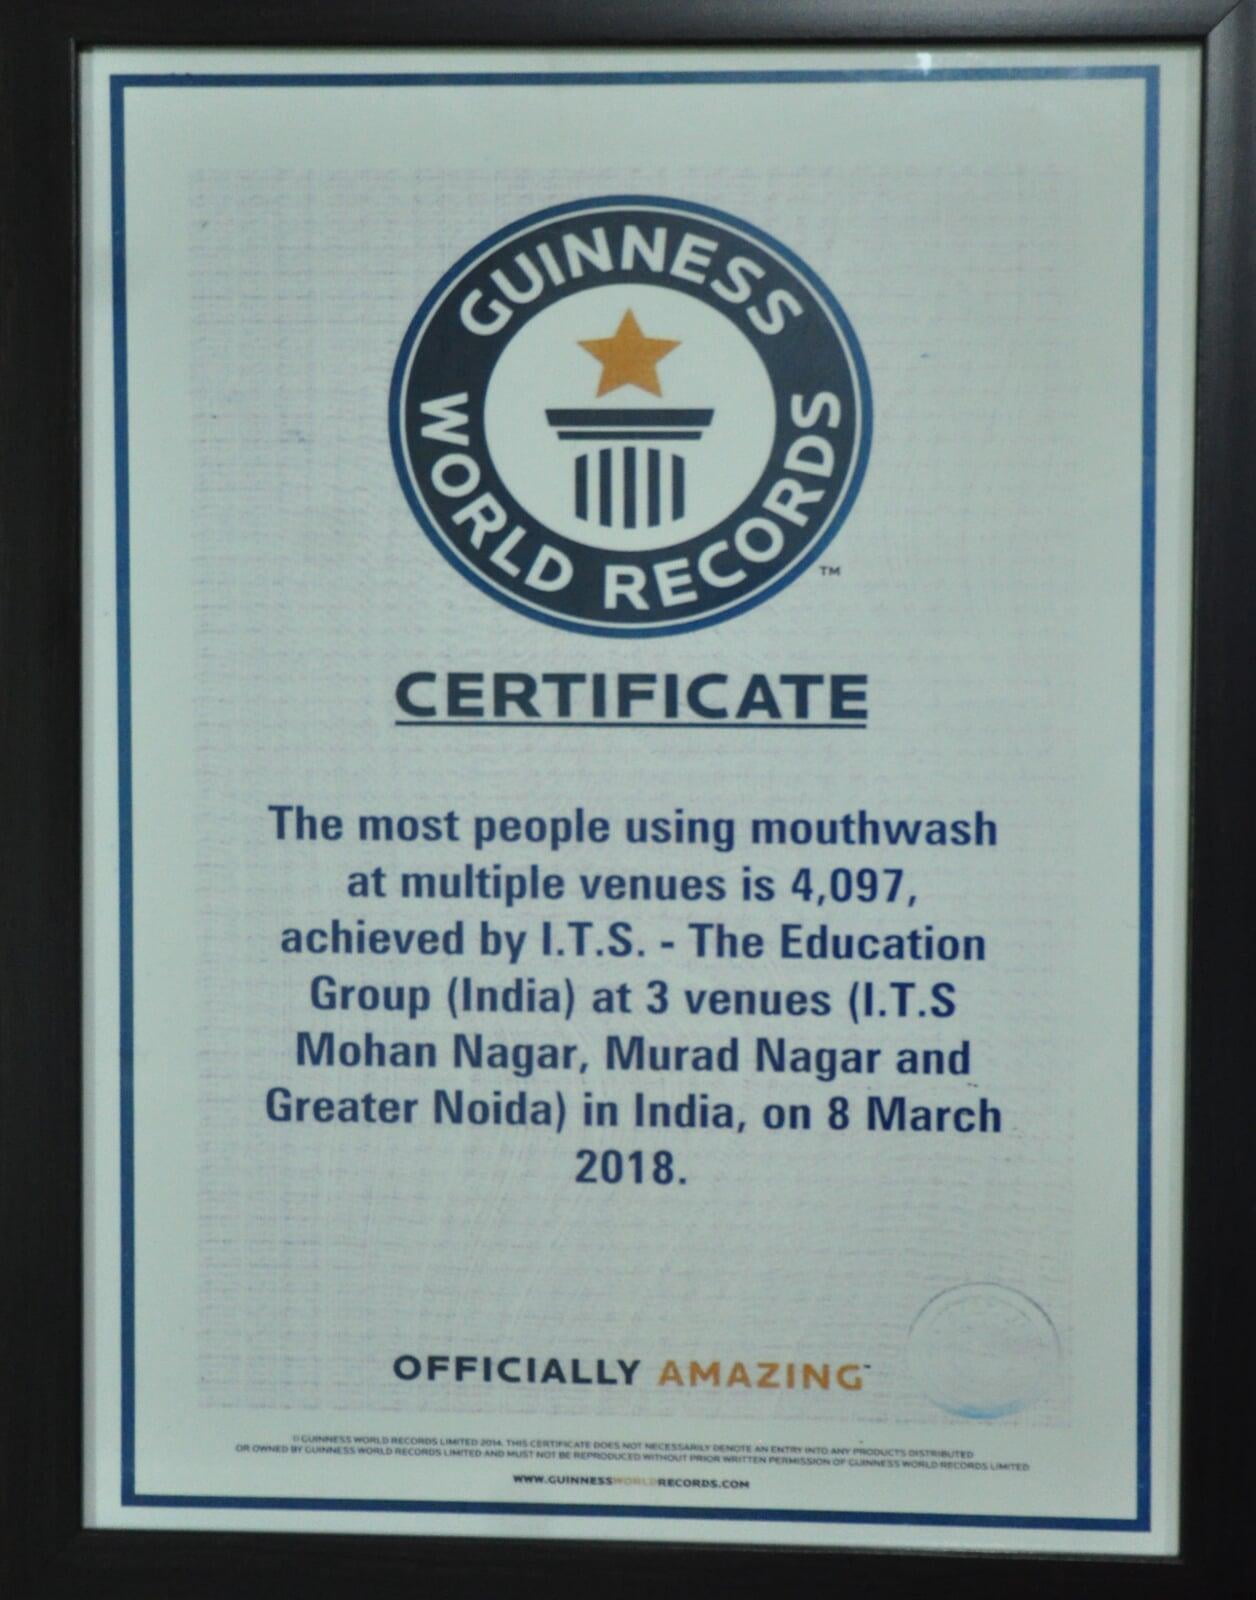 ITS Dental College Guinness World Record